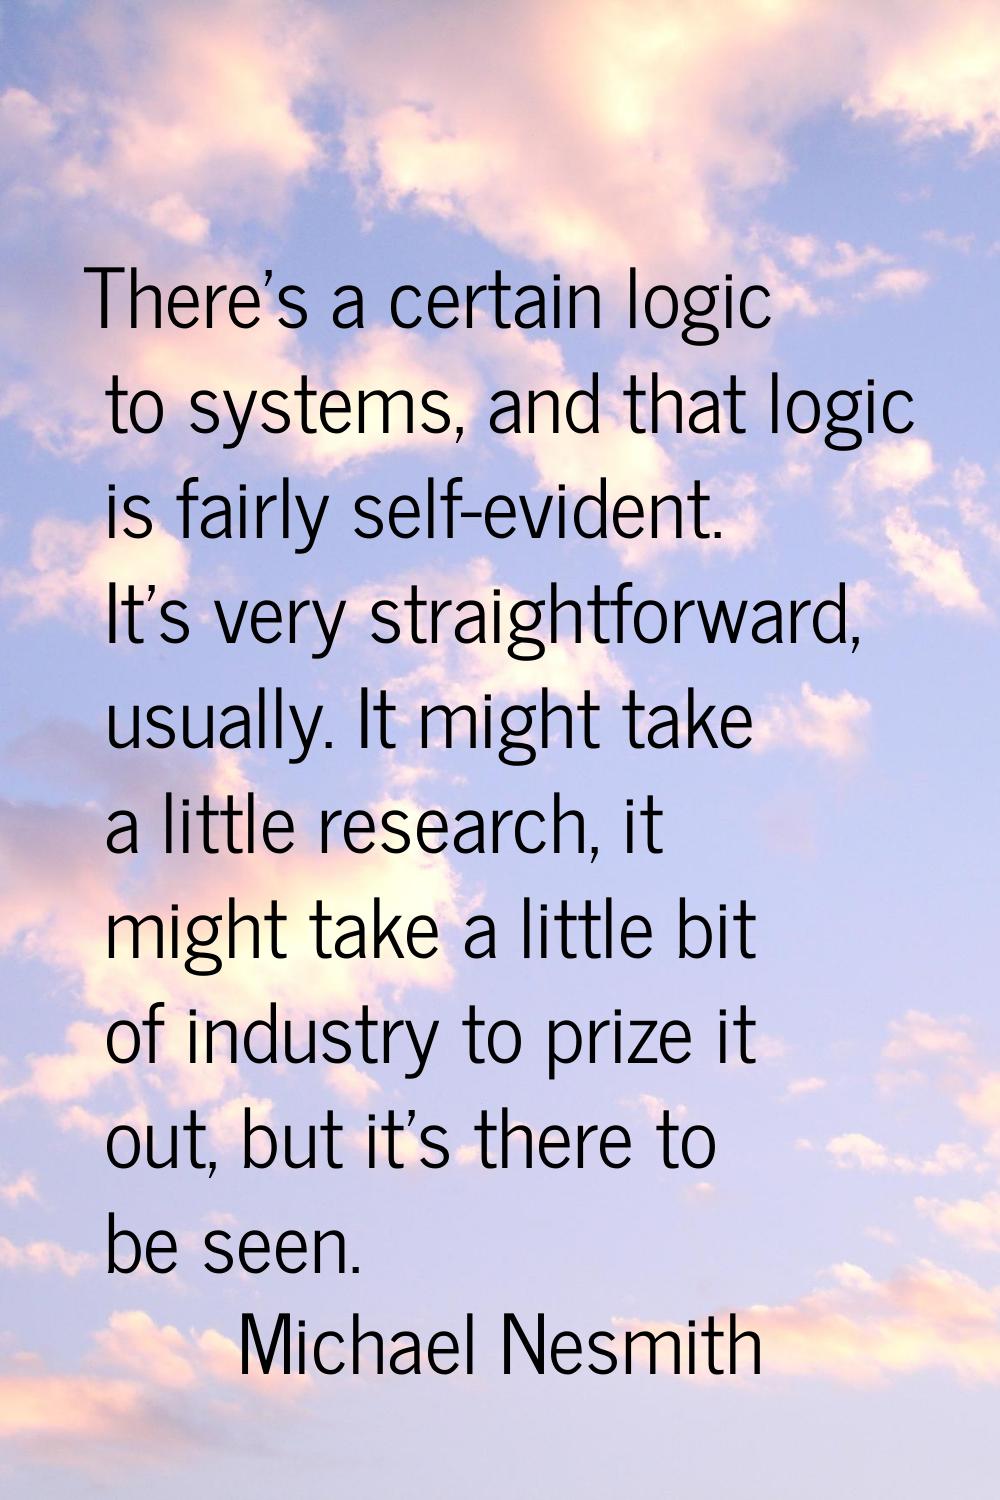 There's a certain logic to systems, and that logic is fairly self-evident. It's very straightforwar